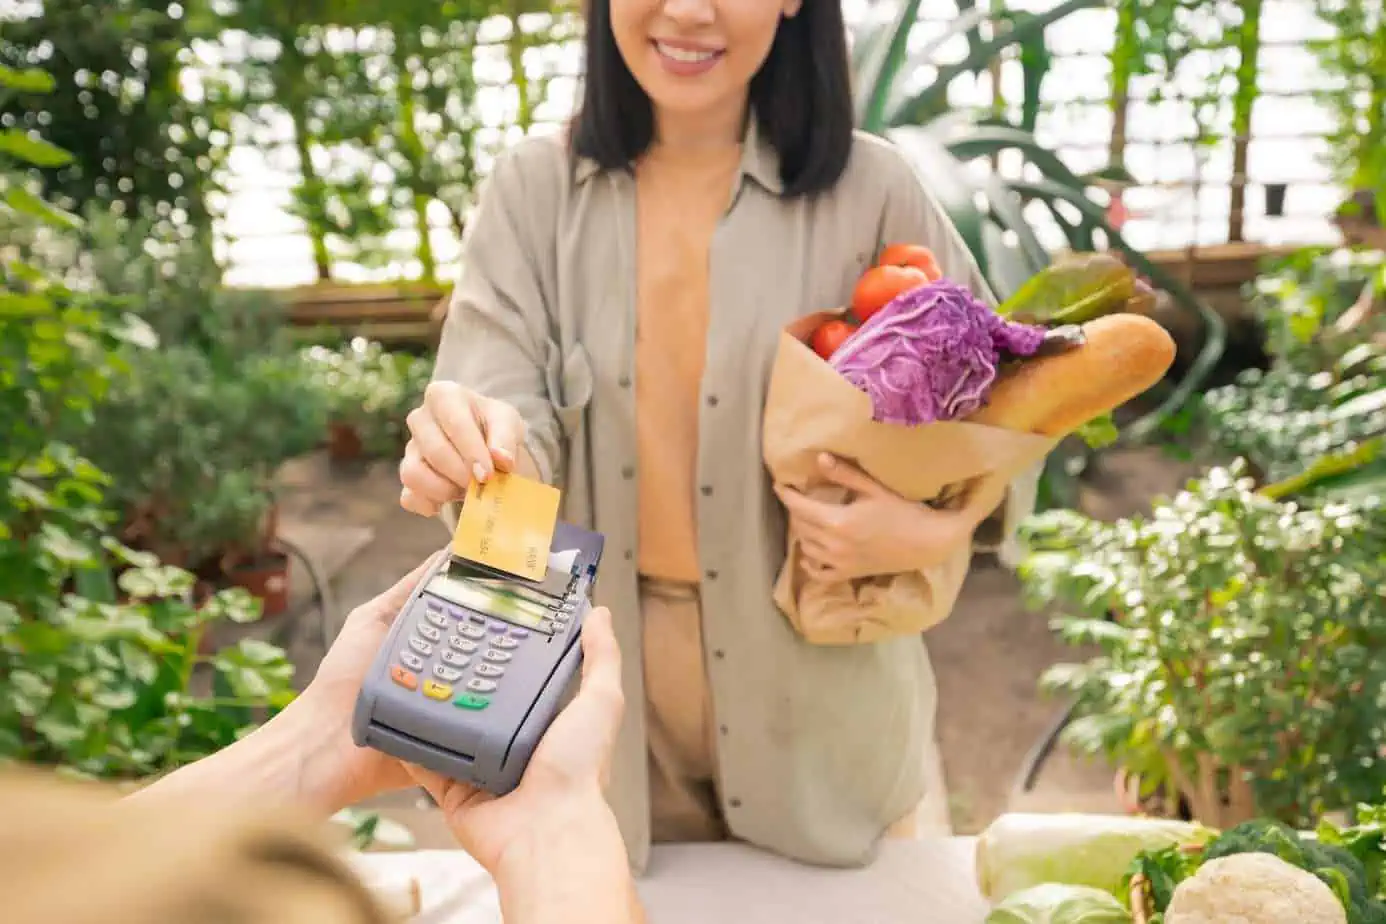 paying-for-organic-food-with-credit-card-EEMXDU5